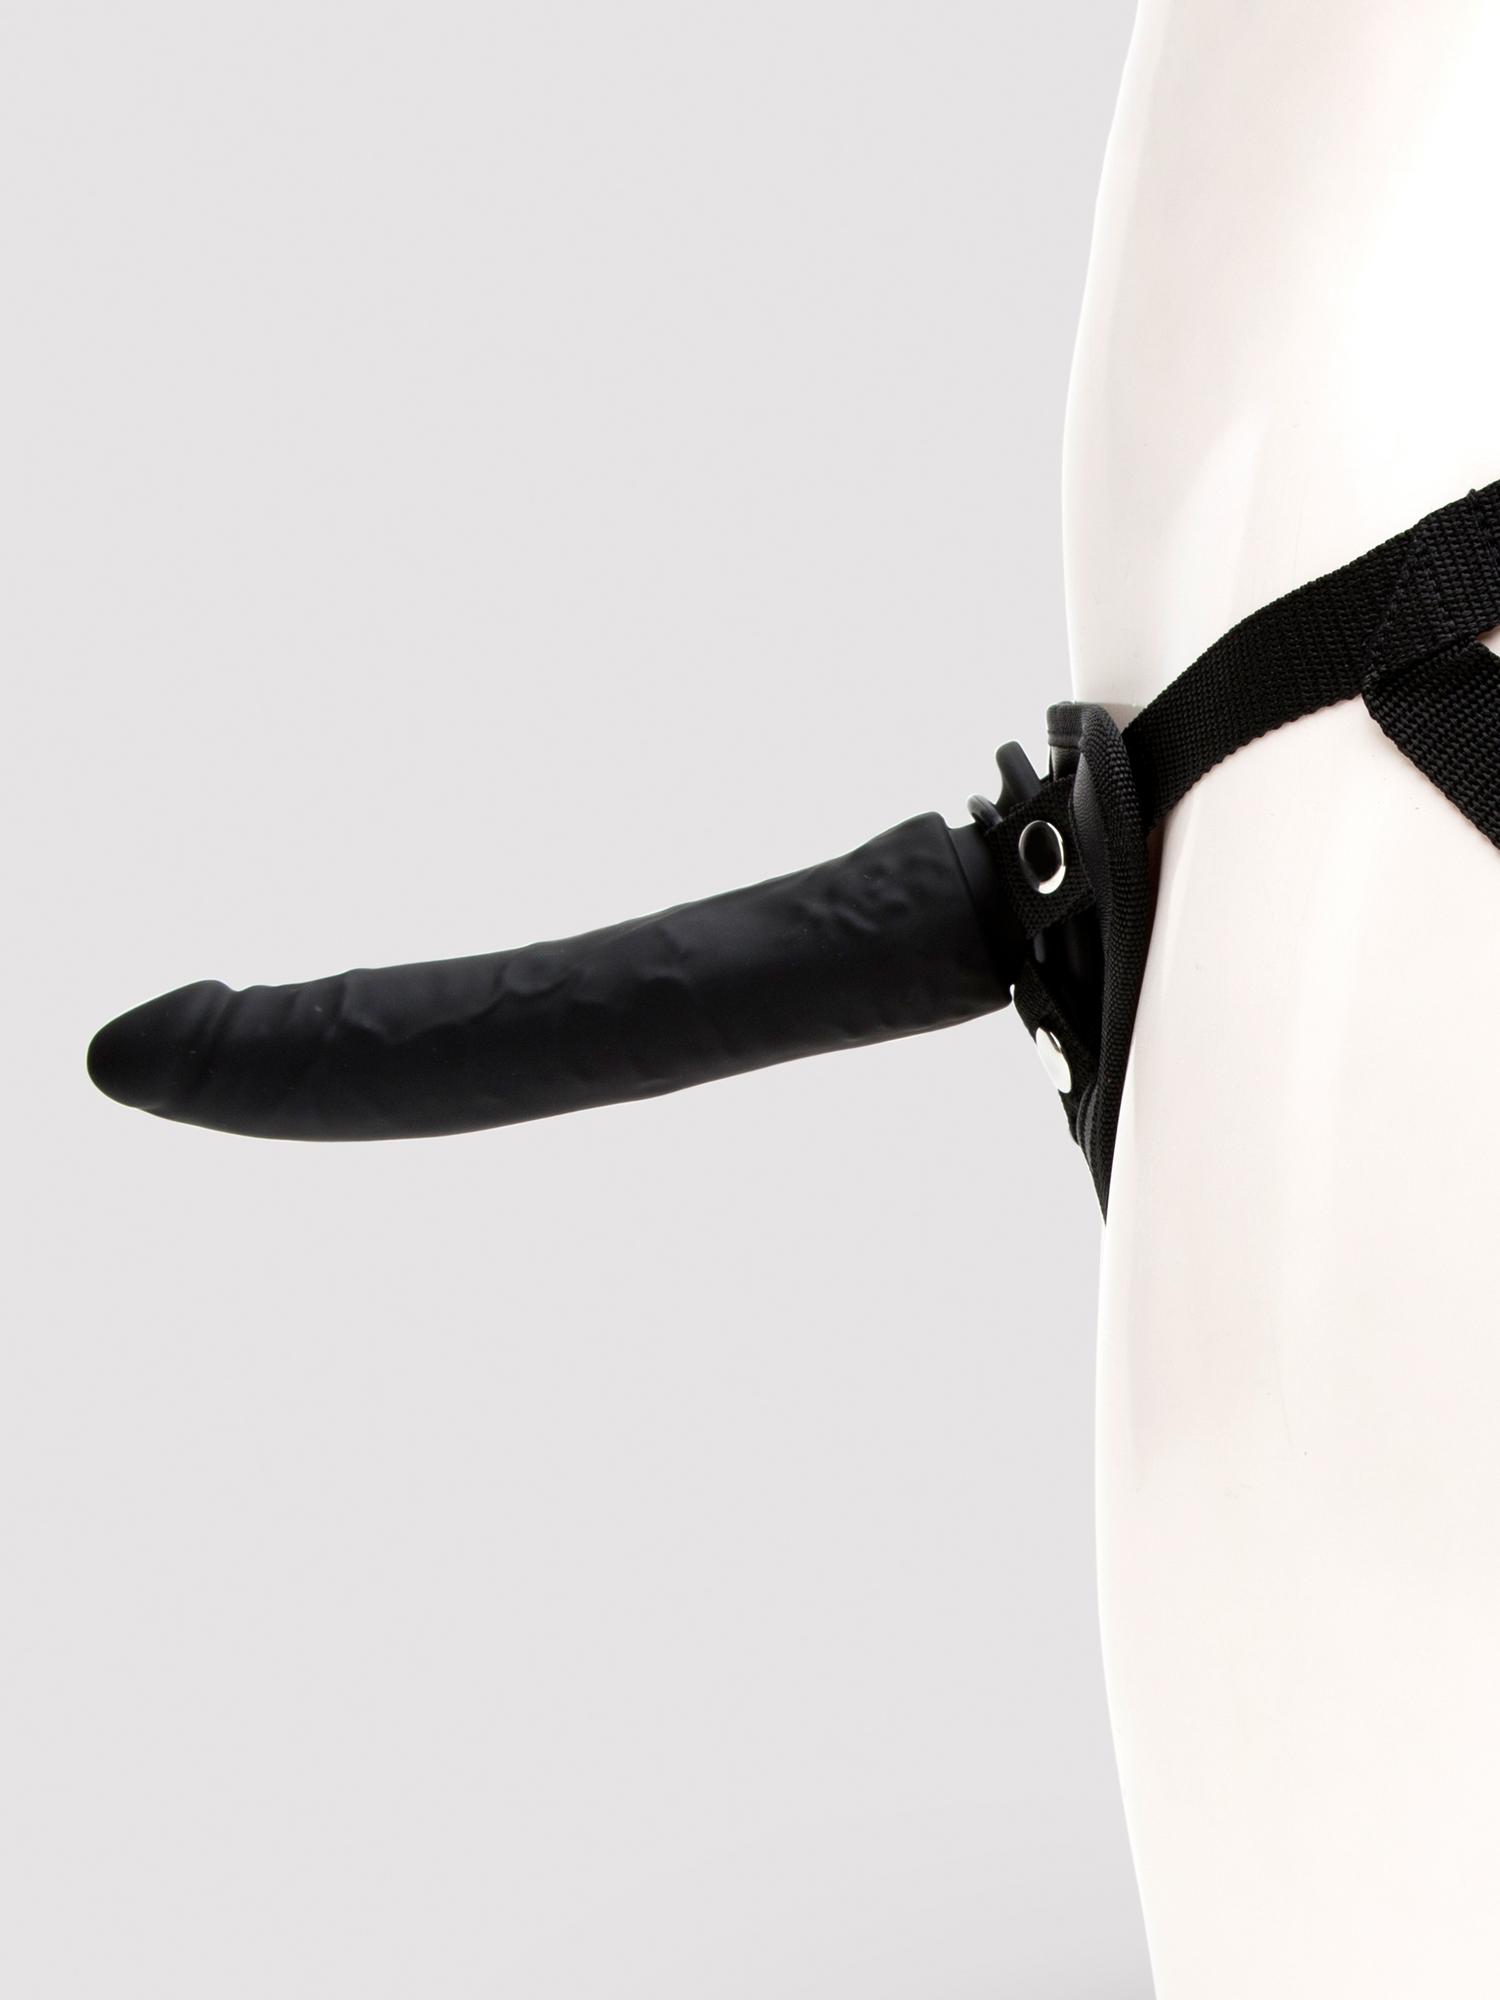 Lovehoney Deluxe Strap-On Harness Kit with 2 Silicone Dildos. Slide 2